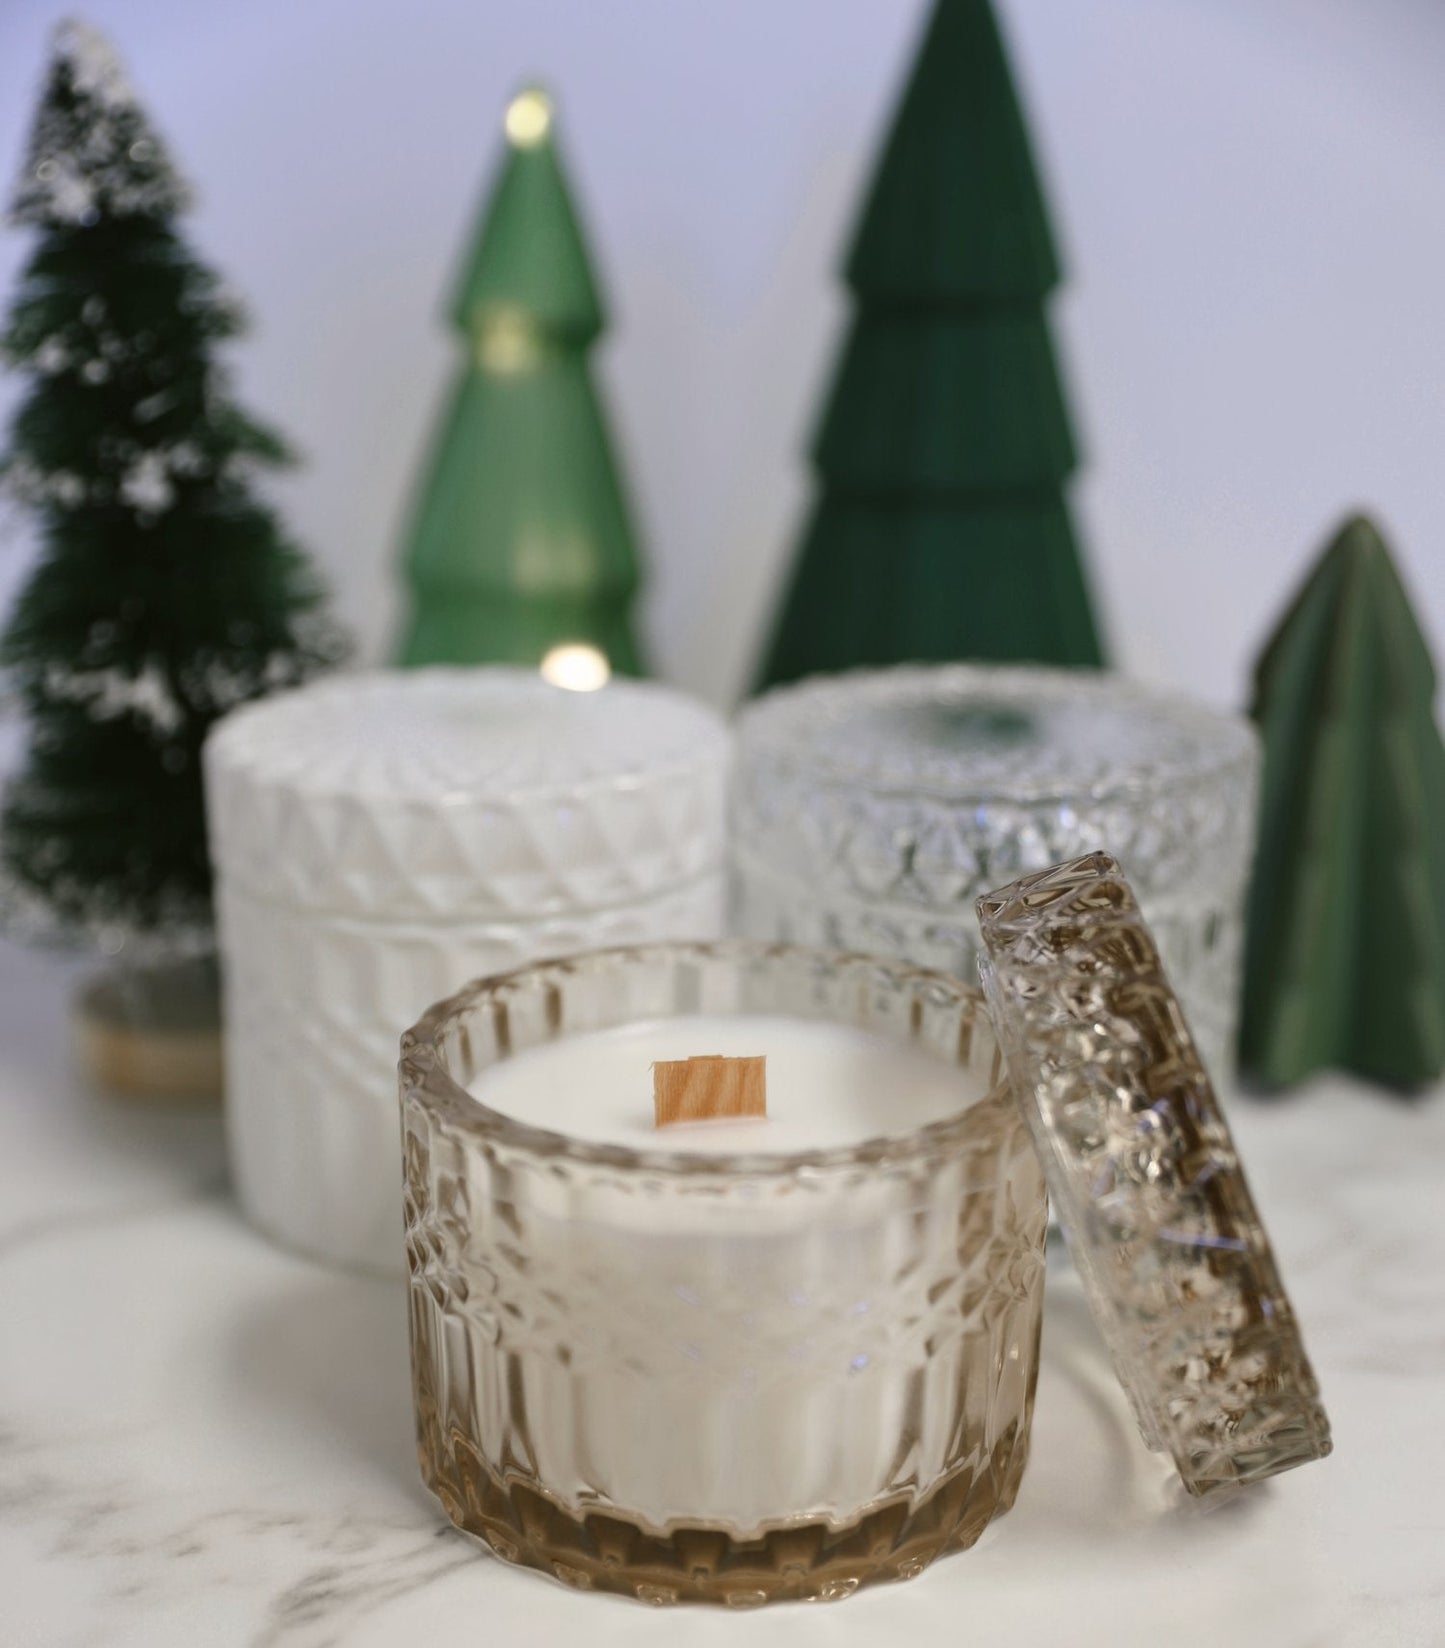 Vintage Inspired Candles - The Dragonfly Boutique